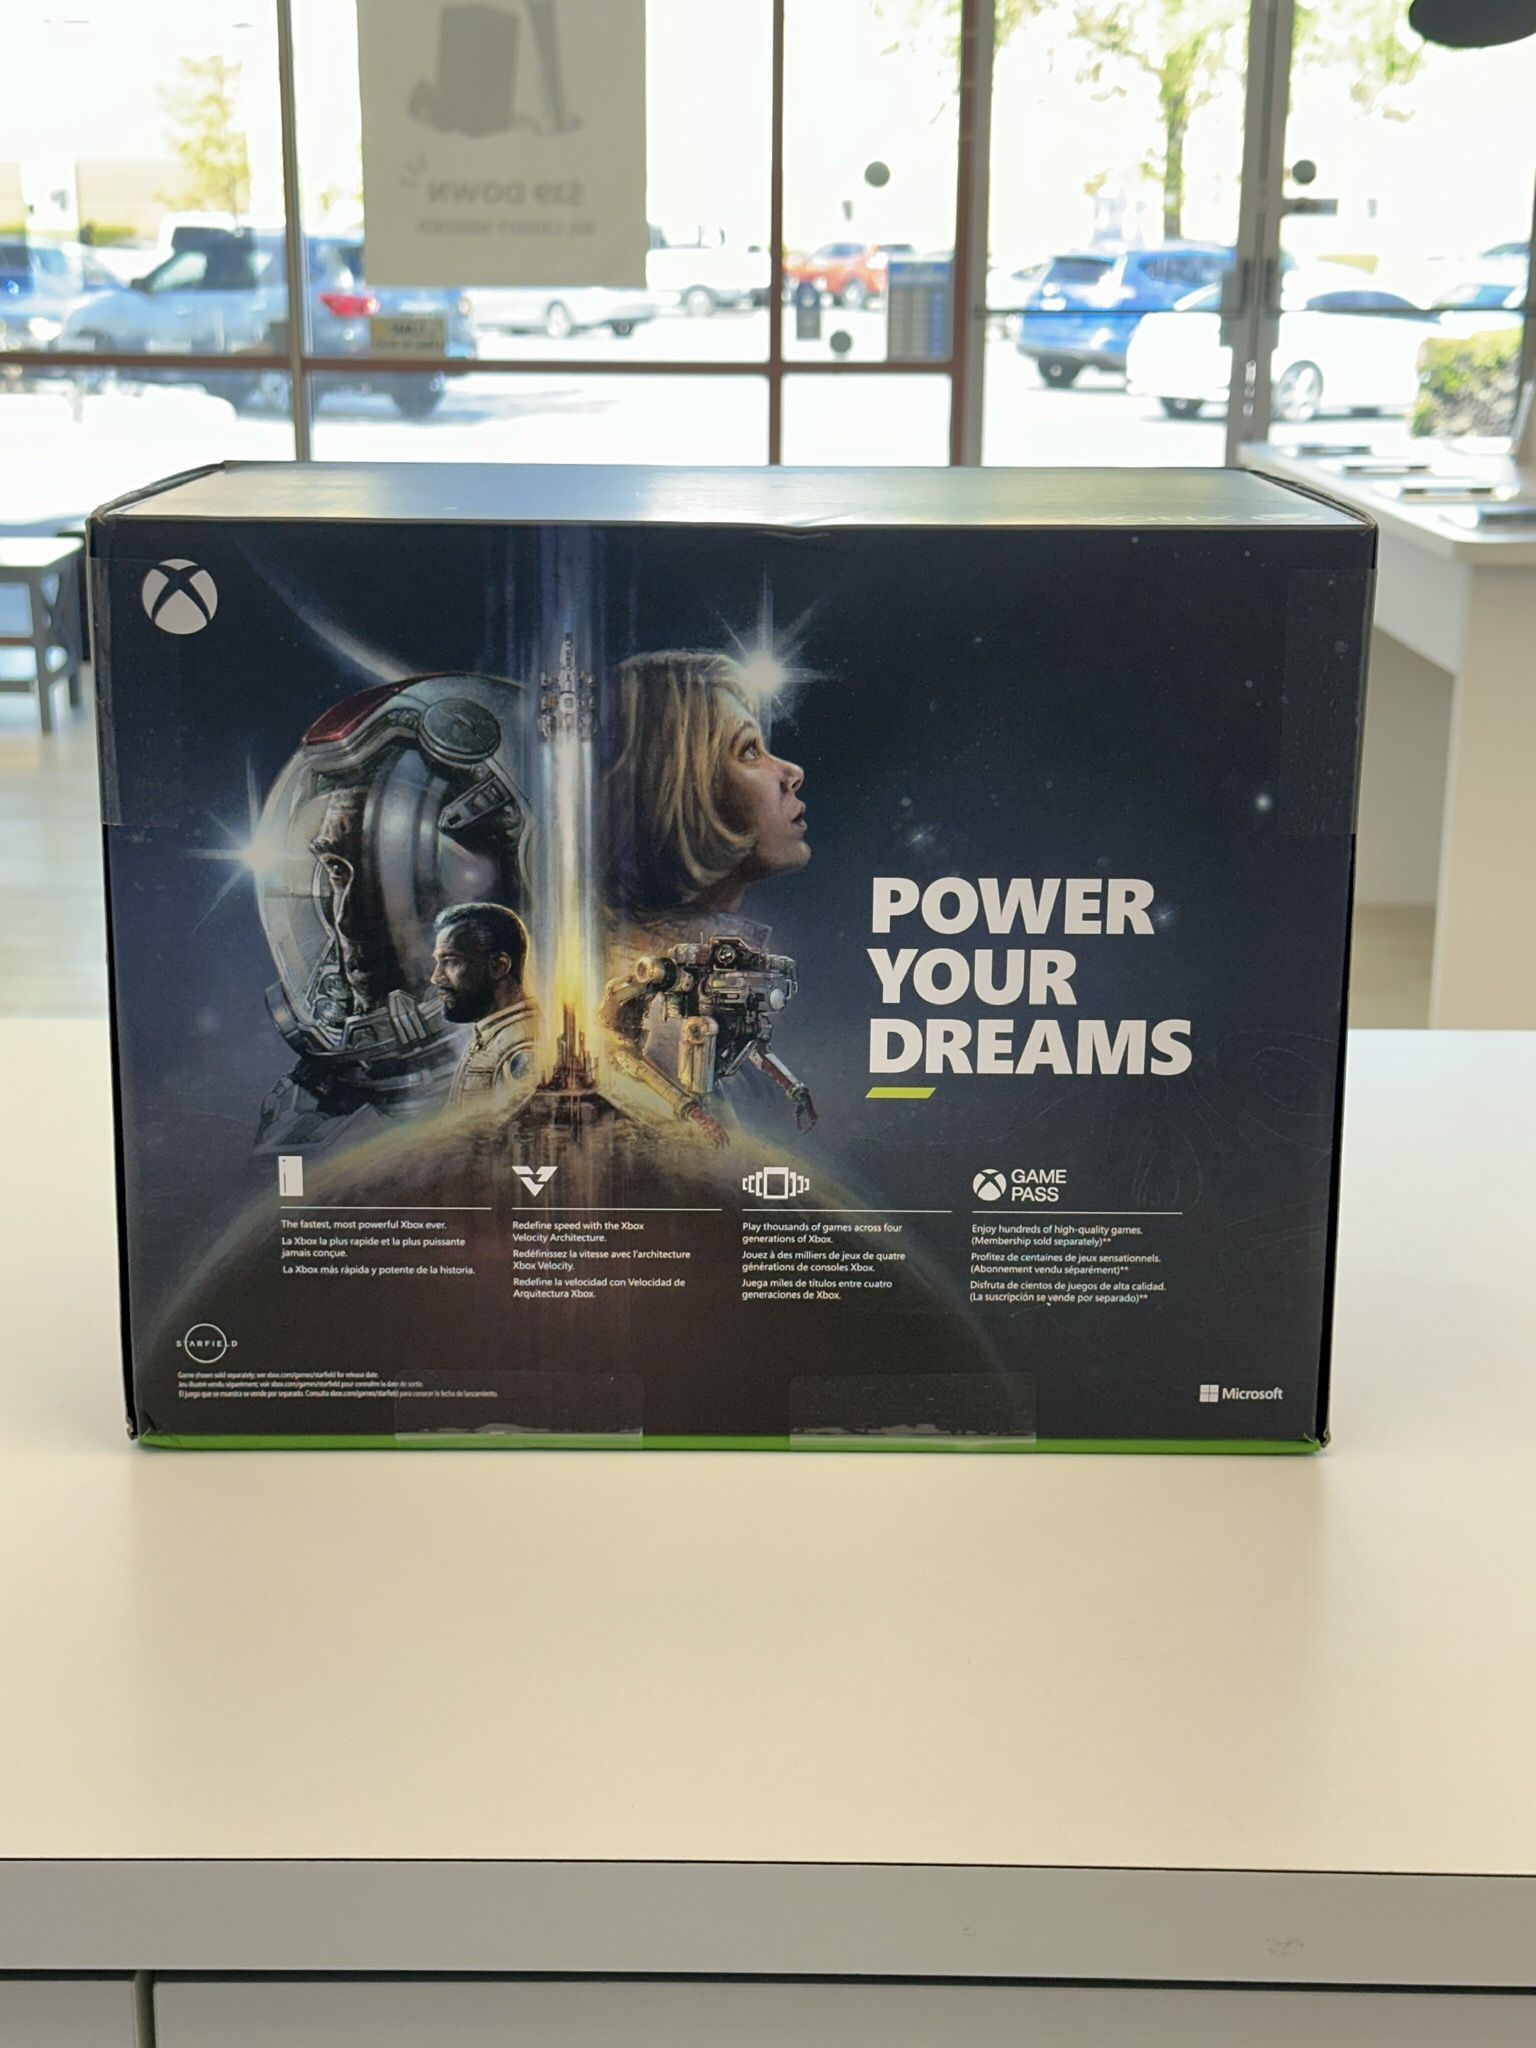 Microsoft Xbox Series X NEW 1TB Gaming Console - Pay $1 Today to Take it Home and Pay the Rest Later!